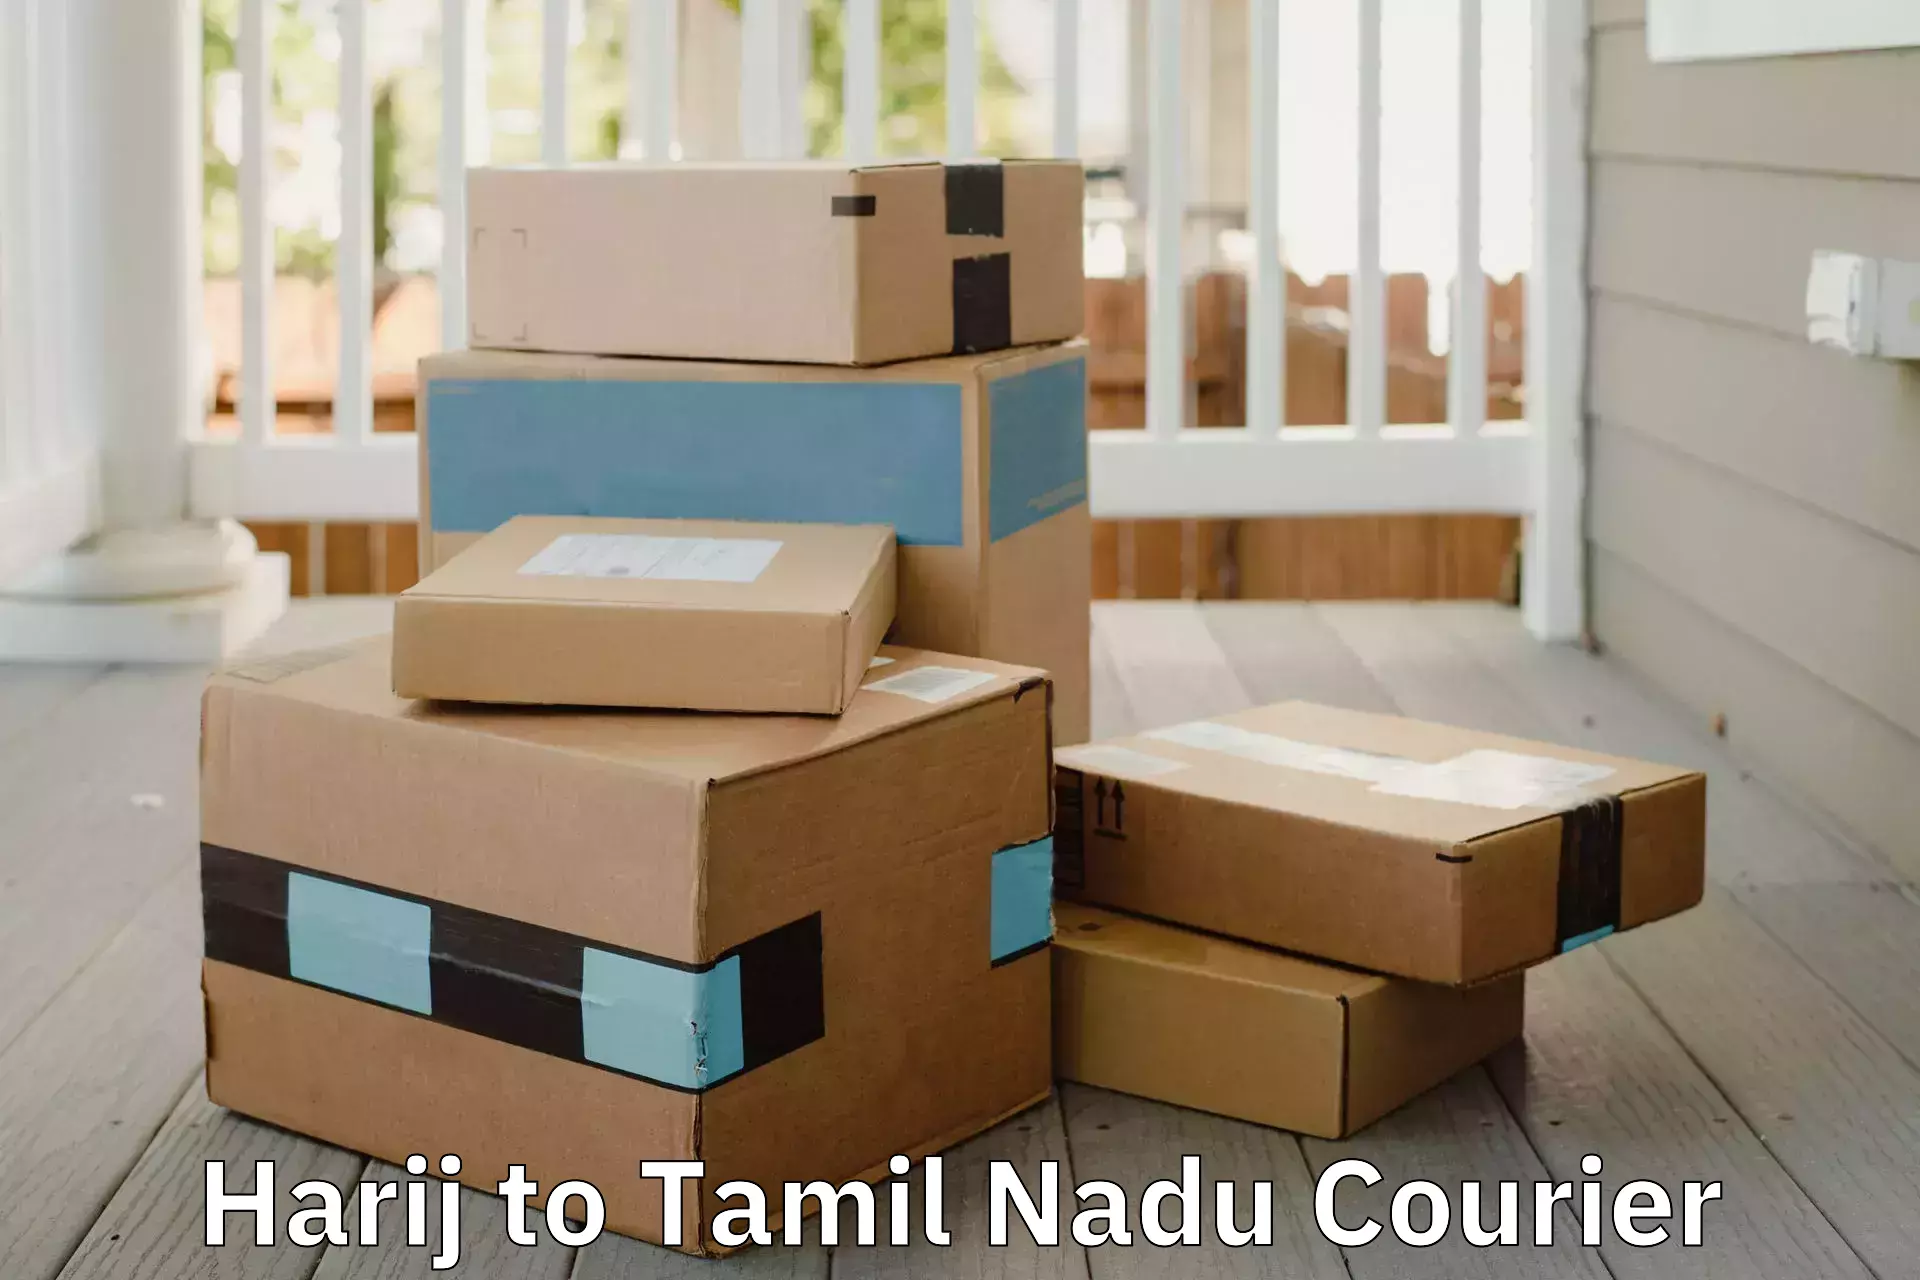 Trusted relocation experts Harij to Chennai